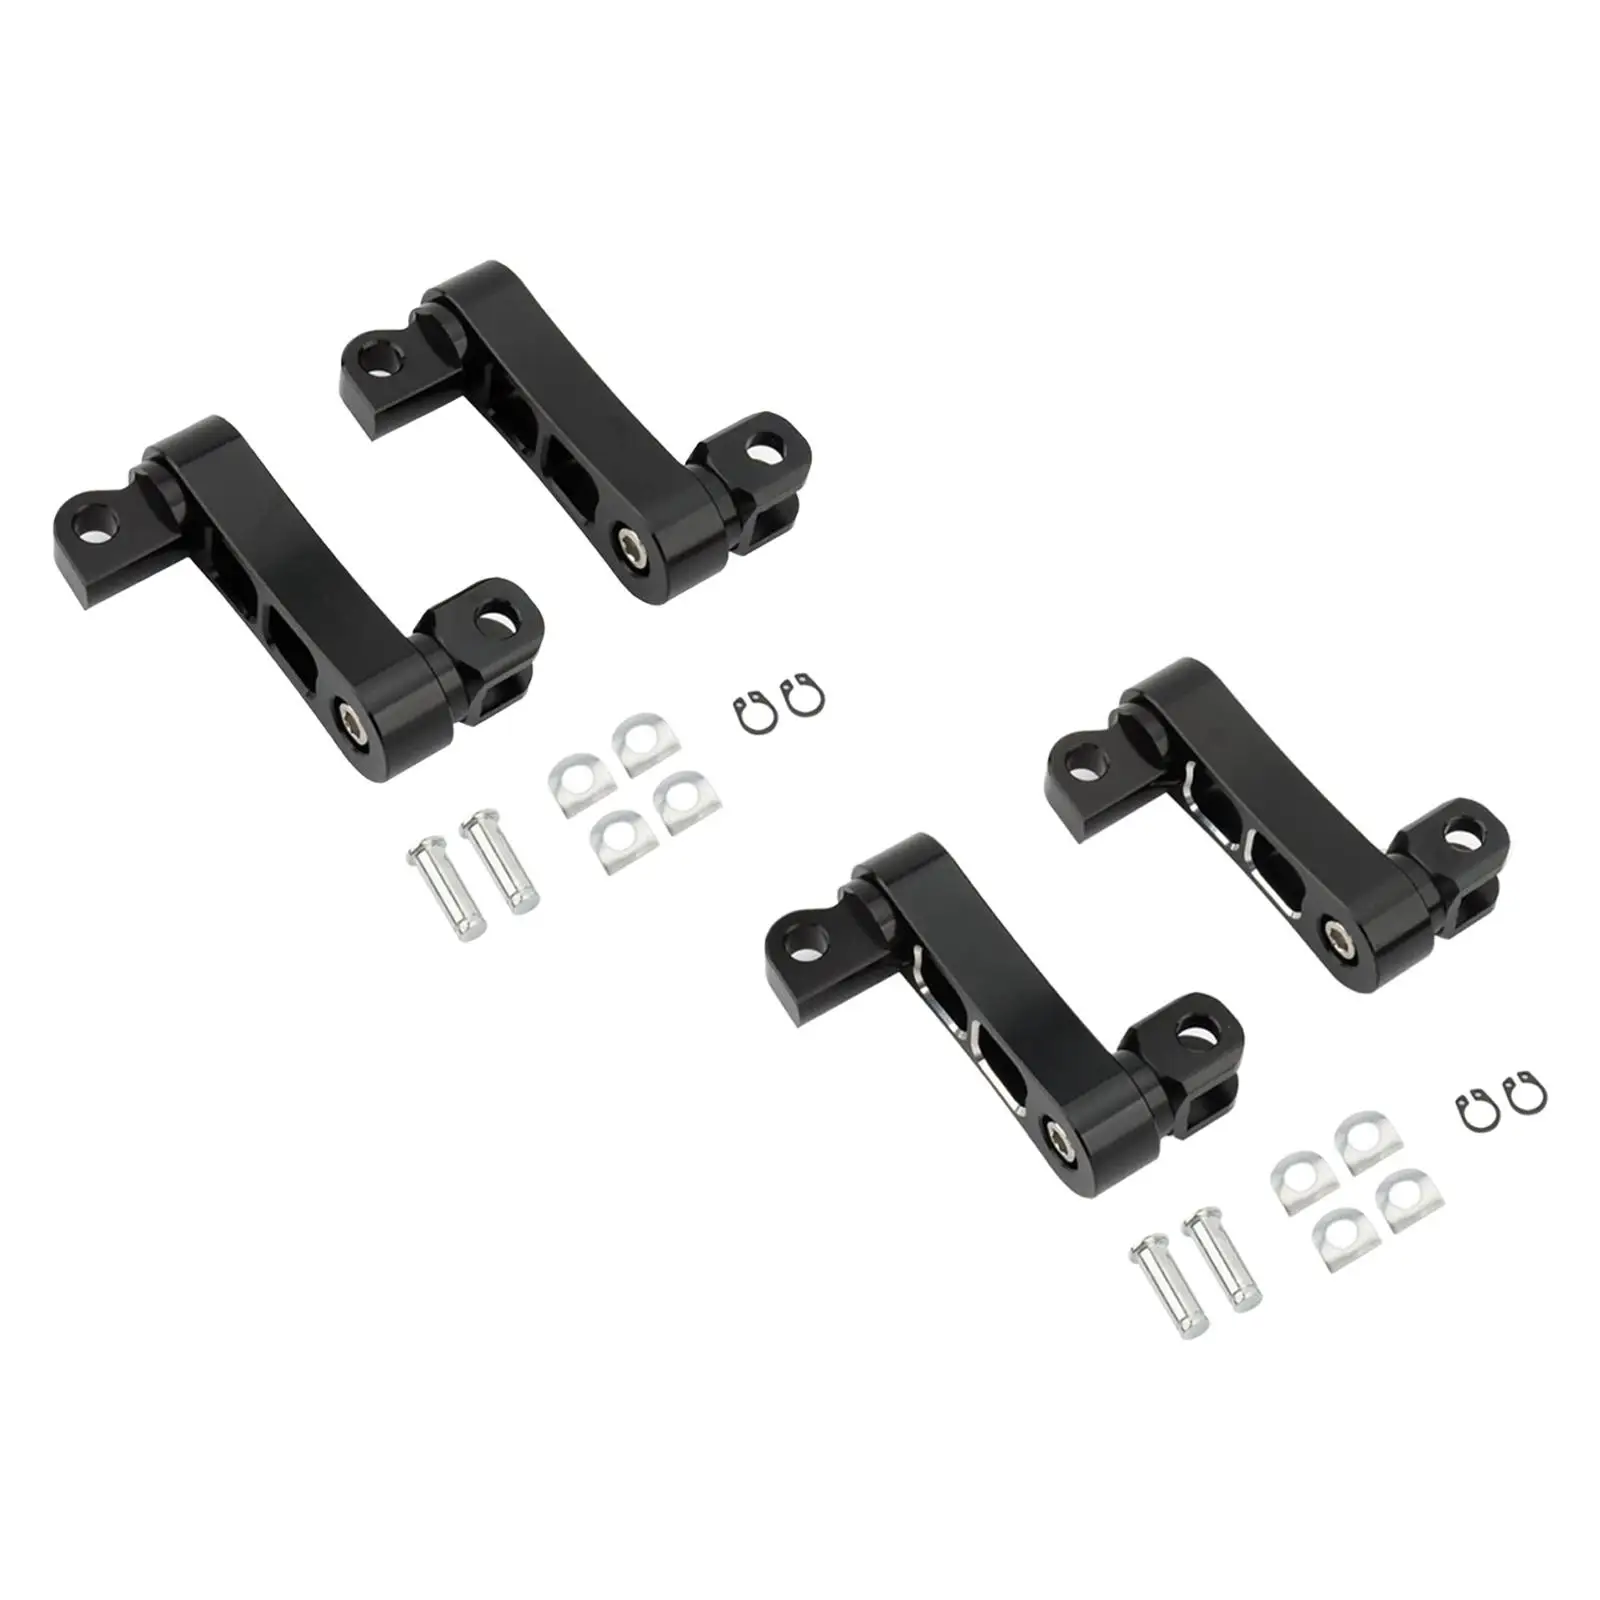 Motorcycle Passenger Footpegs Extensions 500264235A2 Aluminum Stable Performance and Screws Foot Peg Clamp Support Adjustable